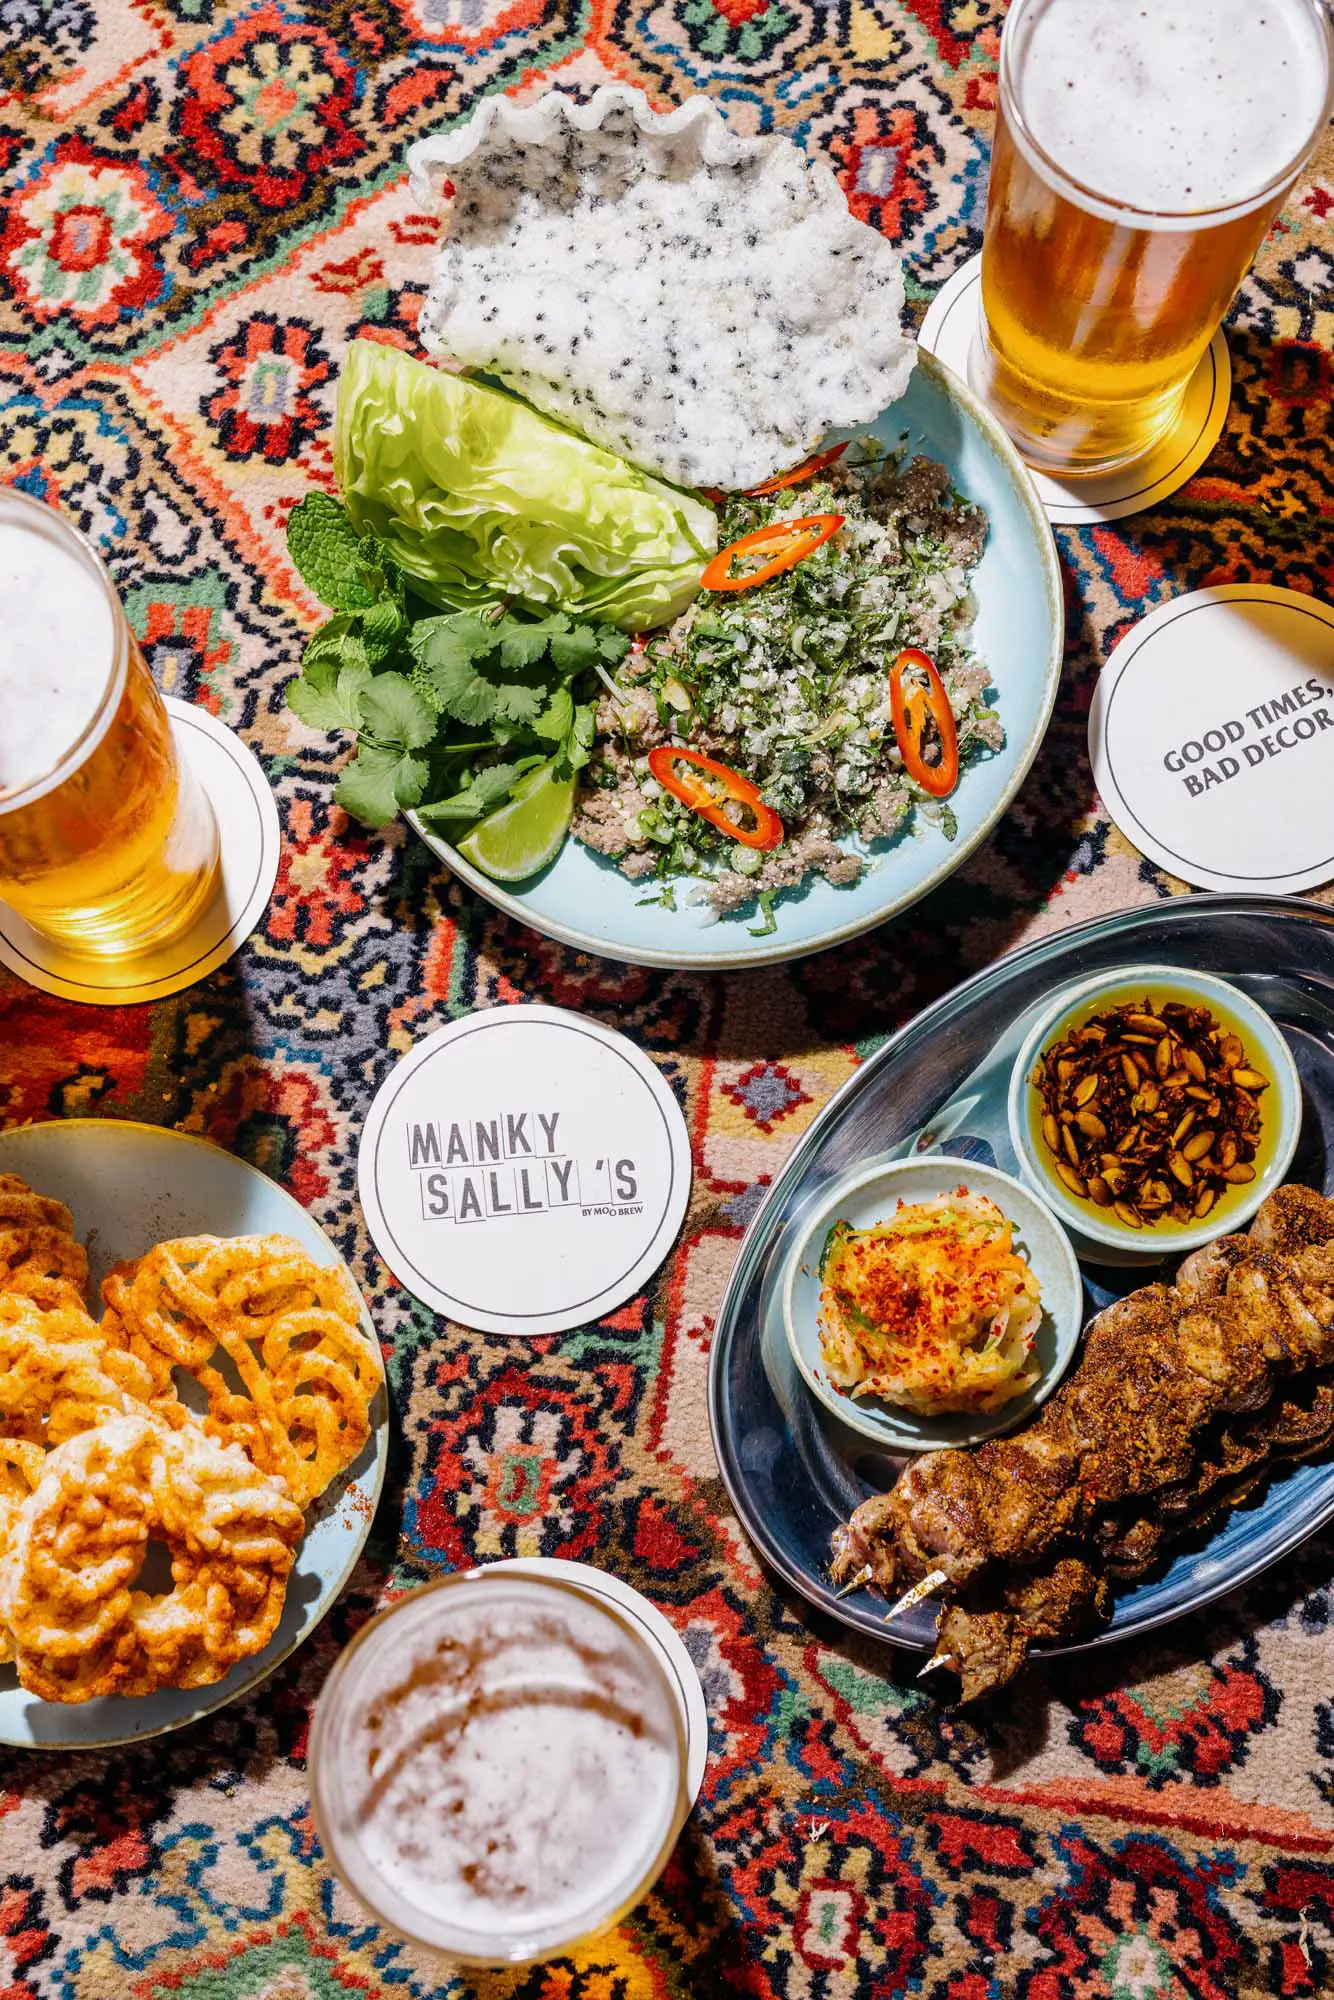 Beer, fried food and vegetables are plated and placed on a colourful, patterned, Persian-style carpet.